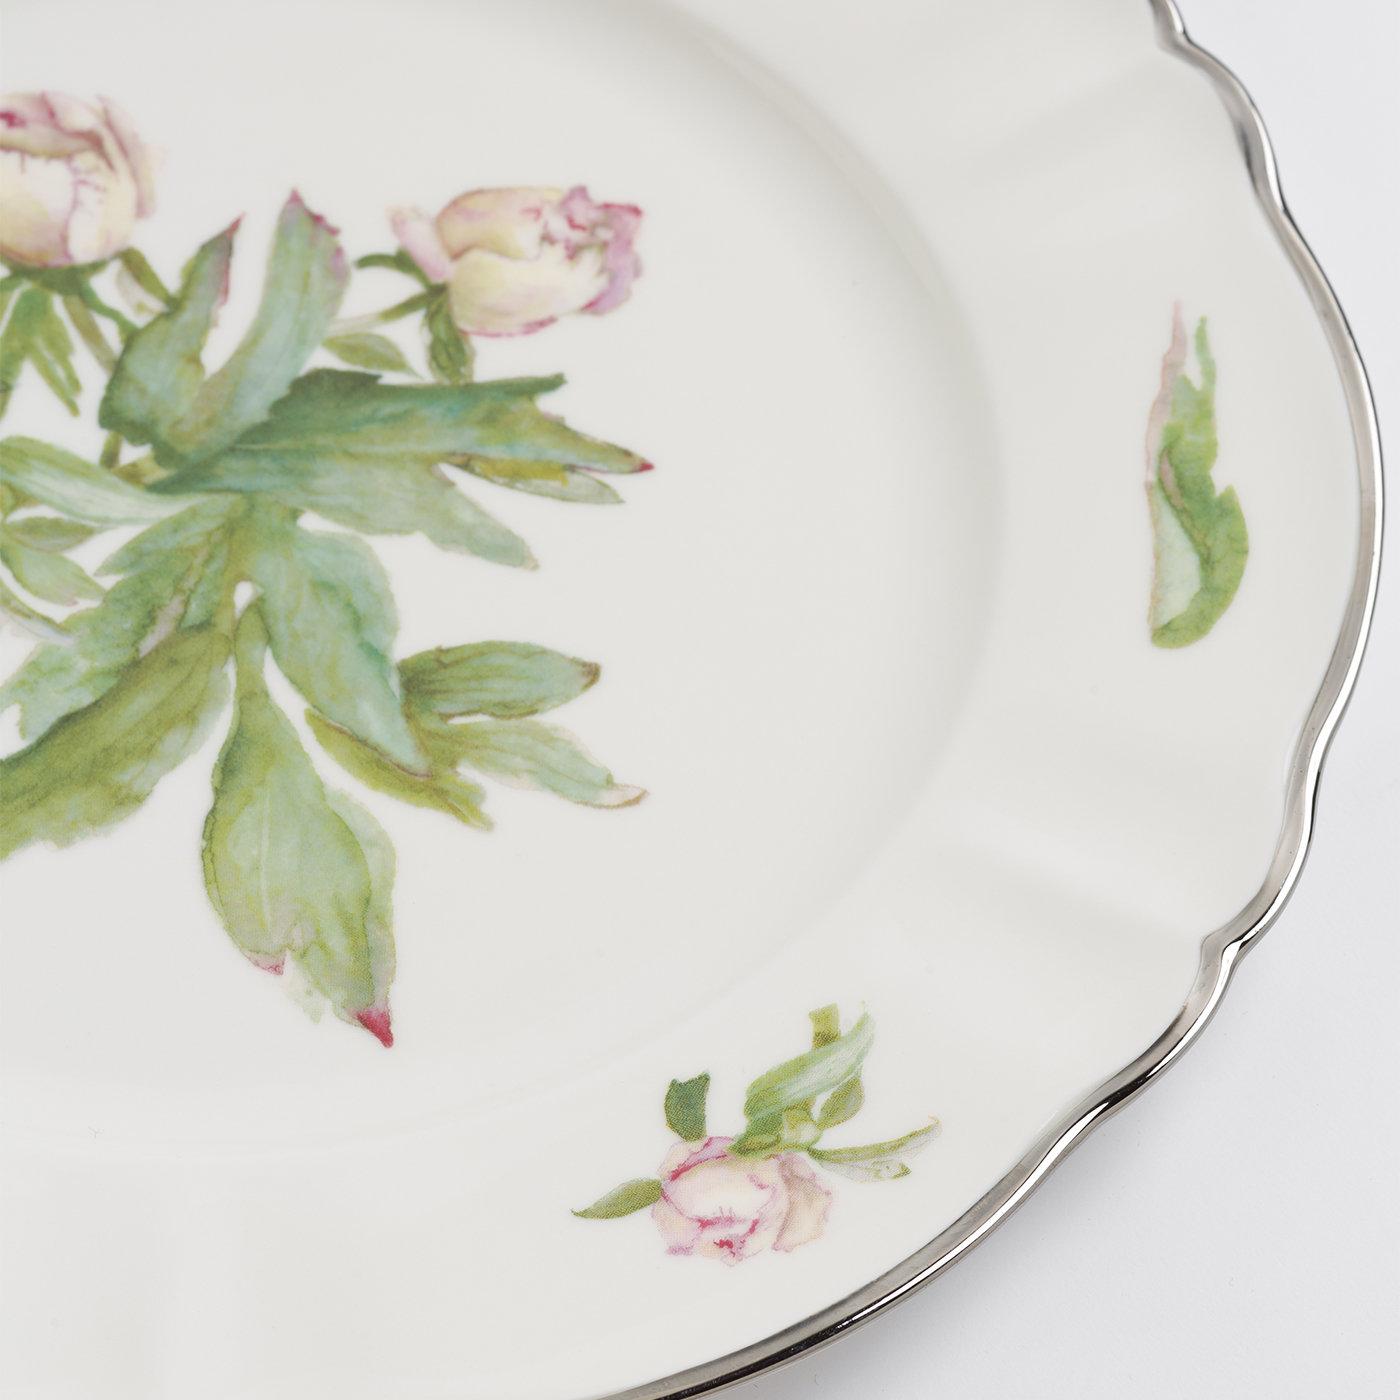 This romantic tray of fine ivory porcelain reveals a first-rate artisan quality flaunted through its classic design and hand-painted, floral decorations - gracing both the center and the edge - rendered in vivid details. Inspired by a drawing of